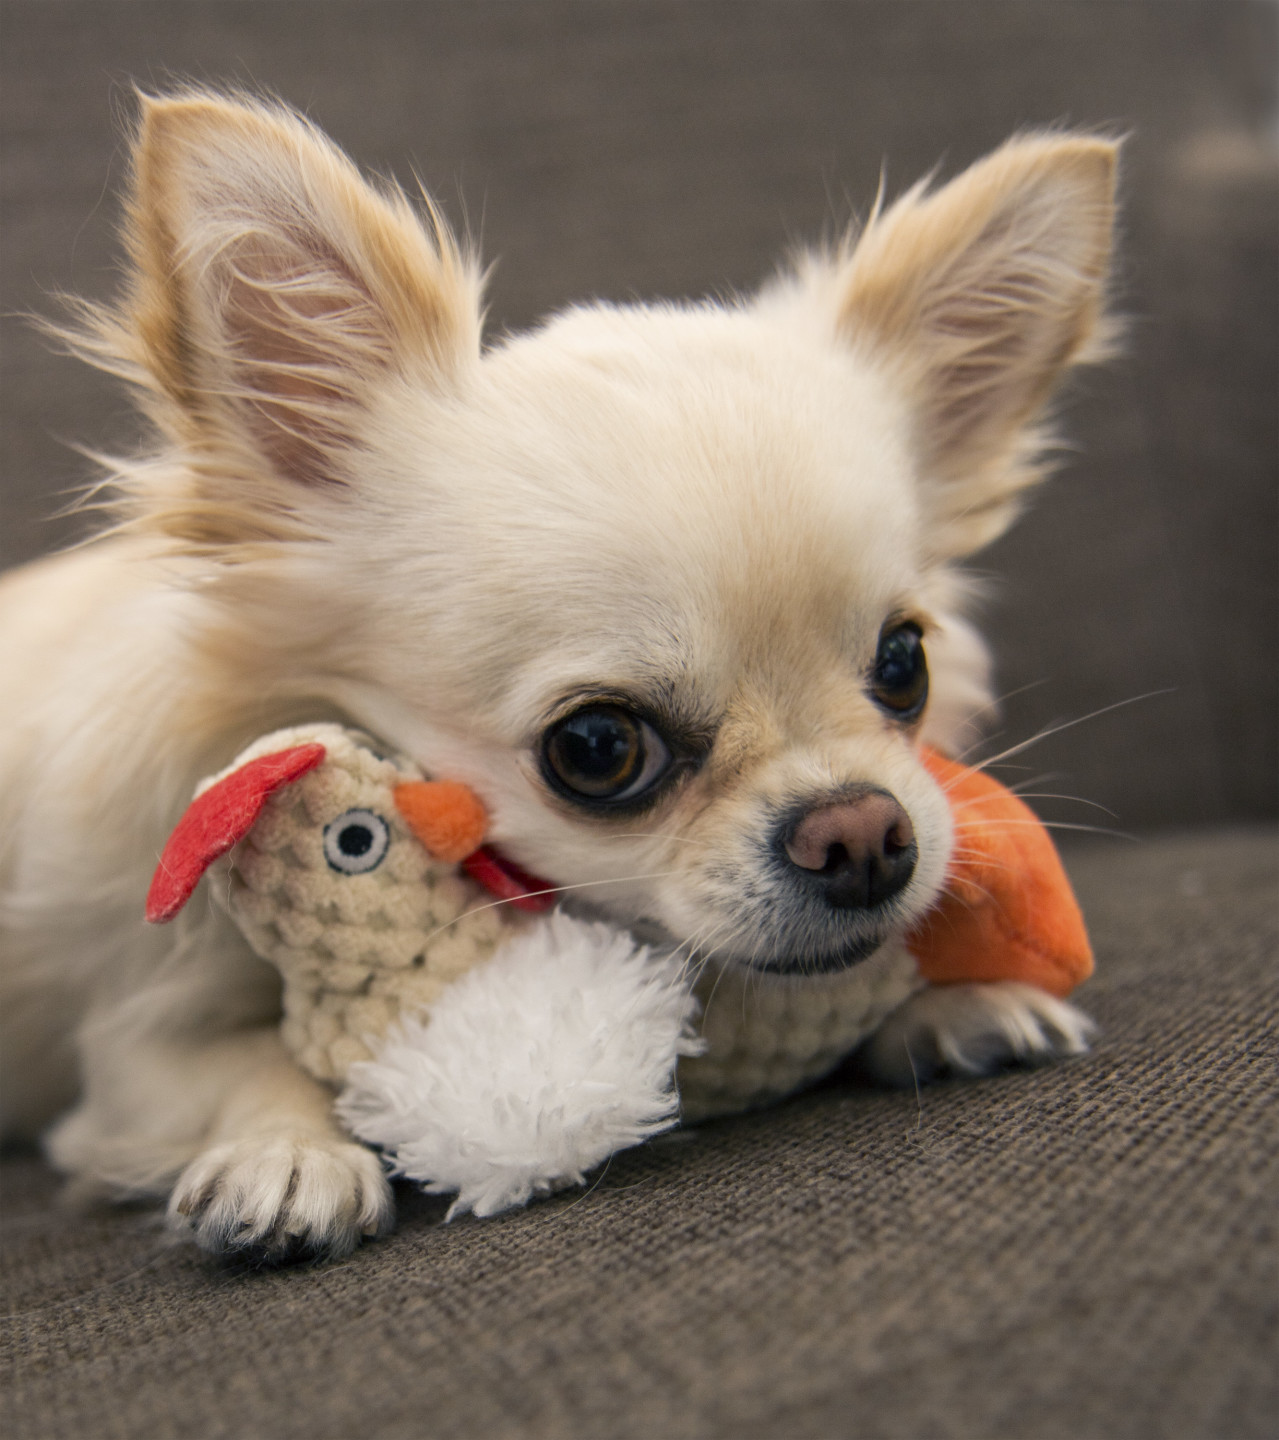 Mini Me Squeaky Breed Dog Toy: Chihuahua